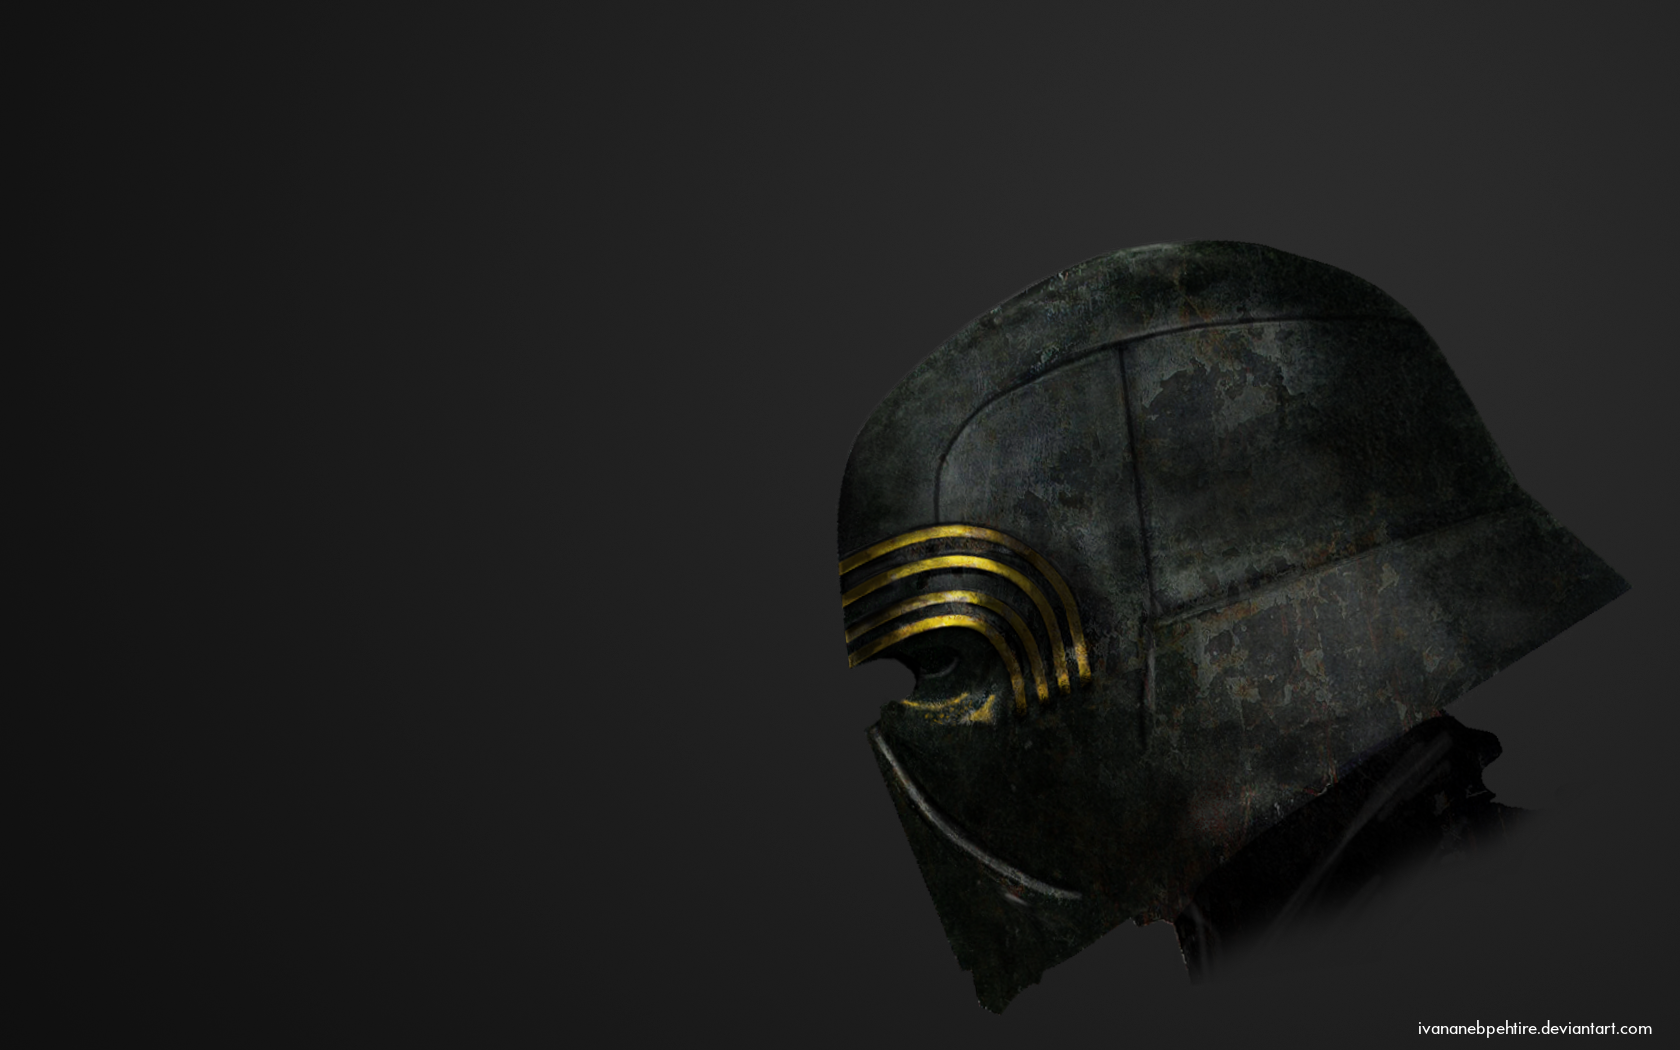 Also if youre looking for a good clear image of the mask I found a 1680x1050